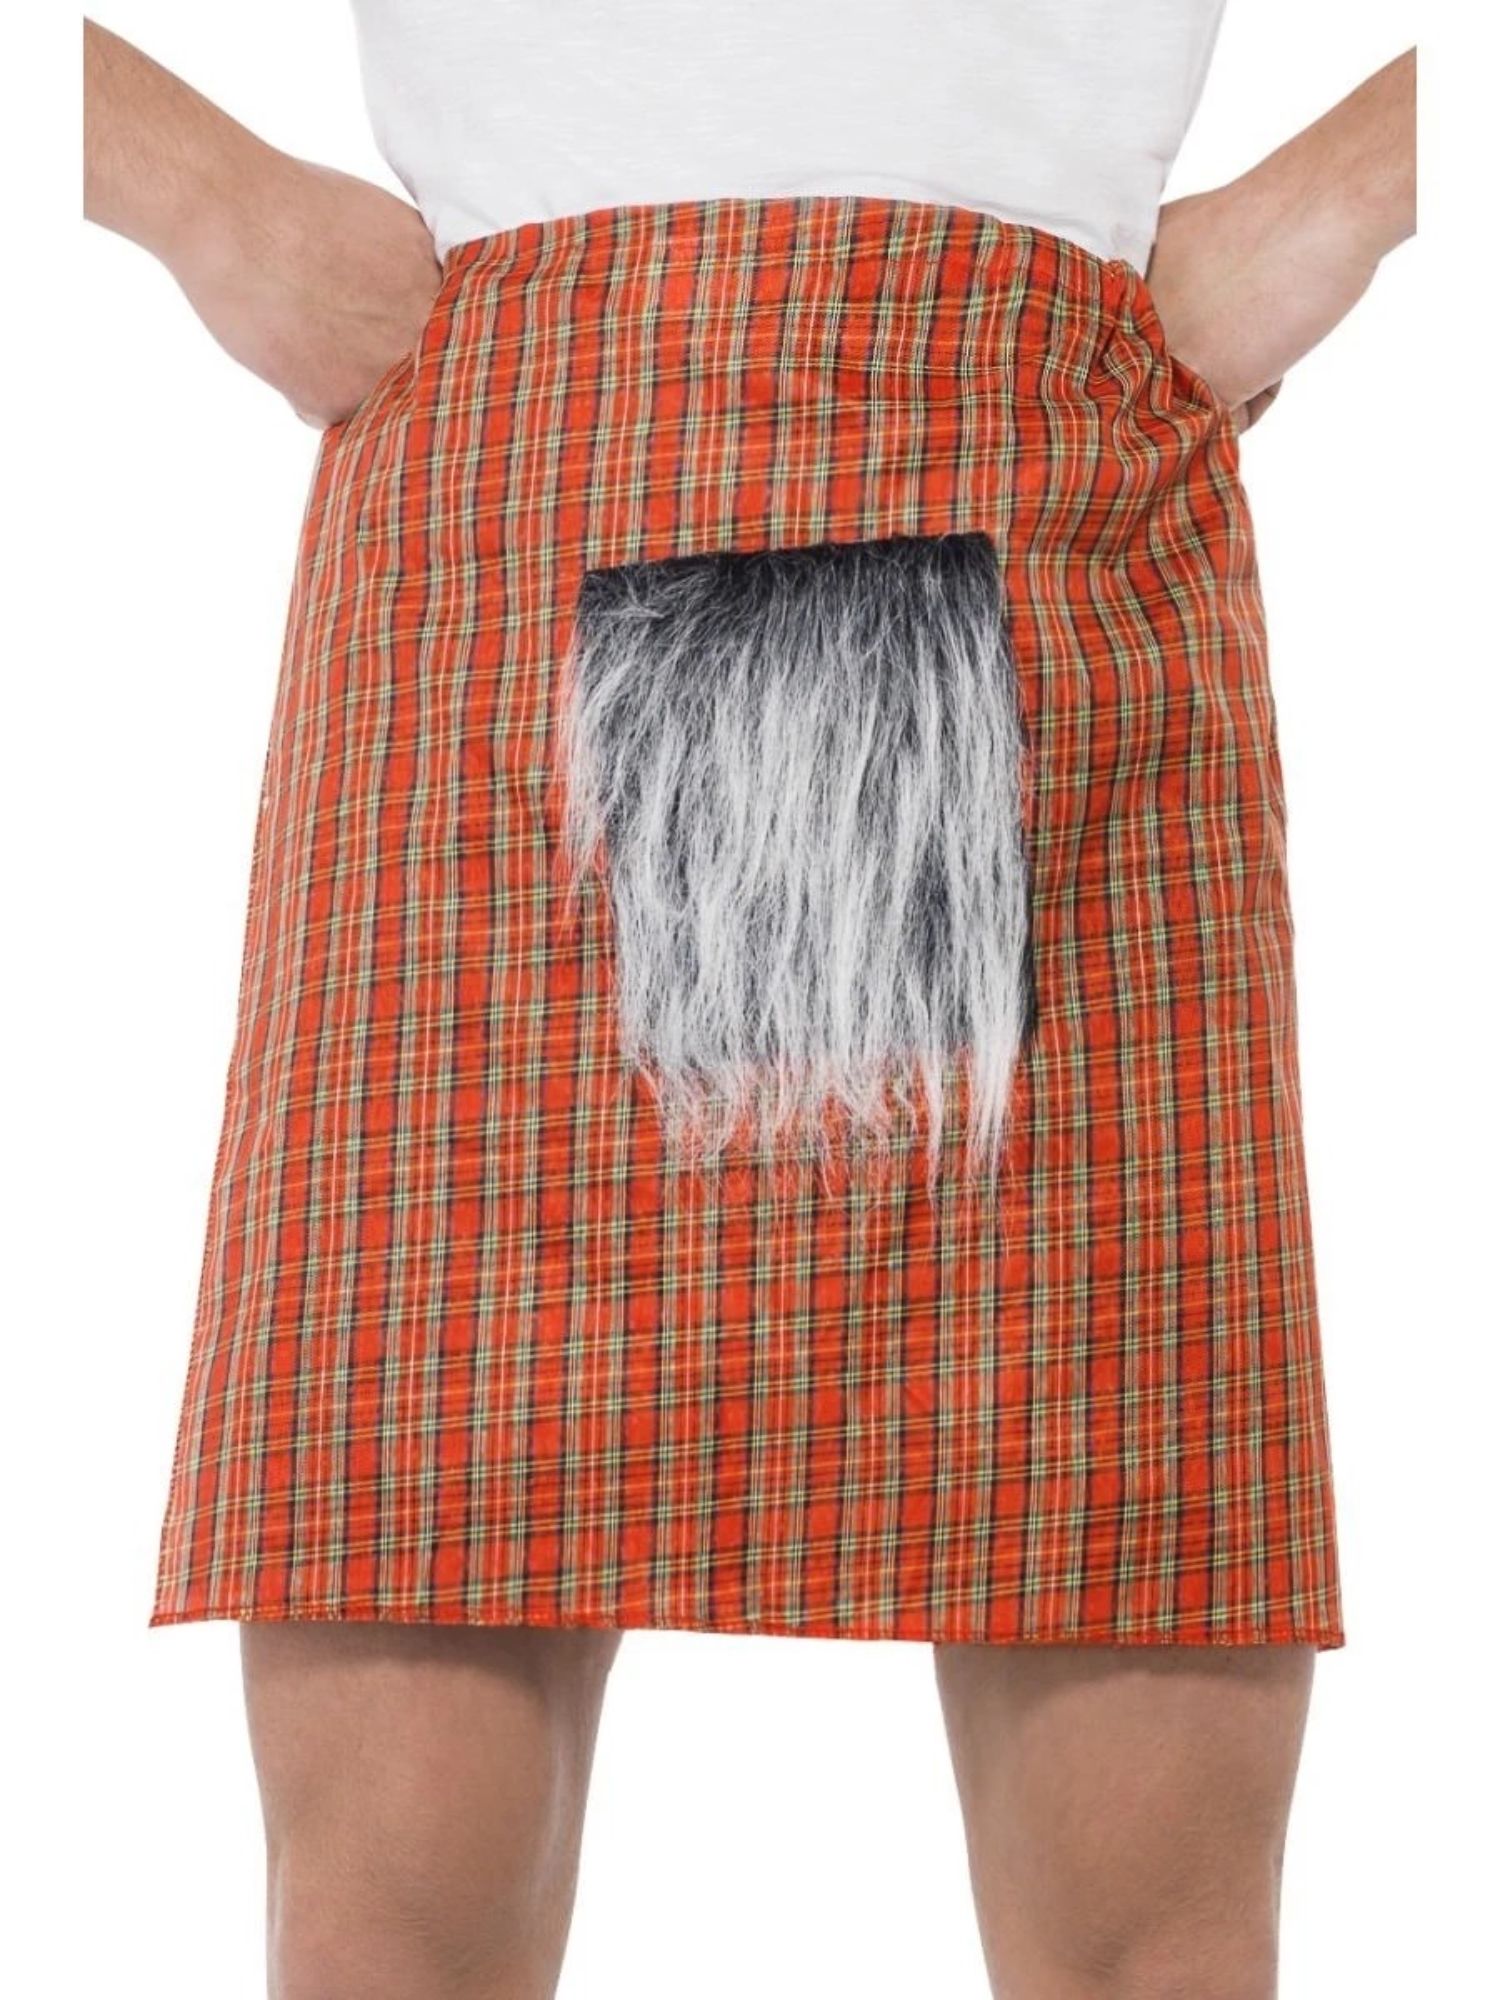 Smiffys 31" Red and Gray Unisex Adult Halloween Tartan Kilt with Sporran Costume Accessory - One Size